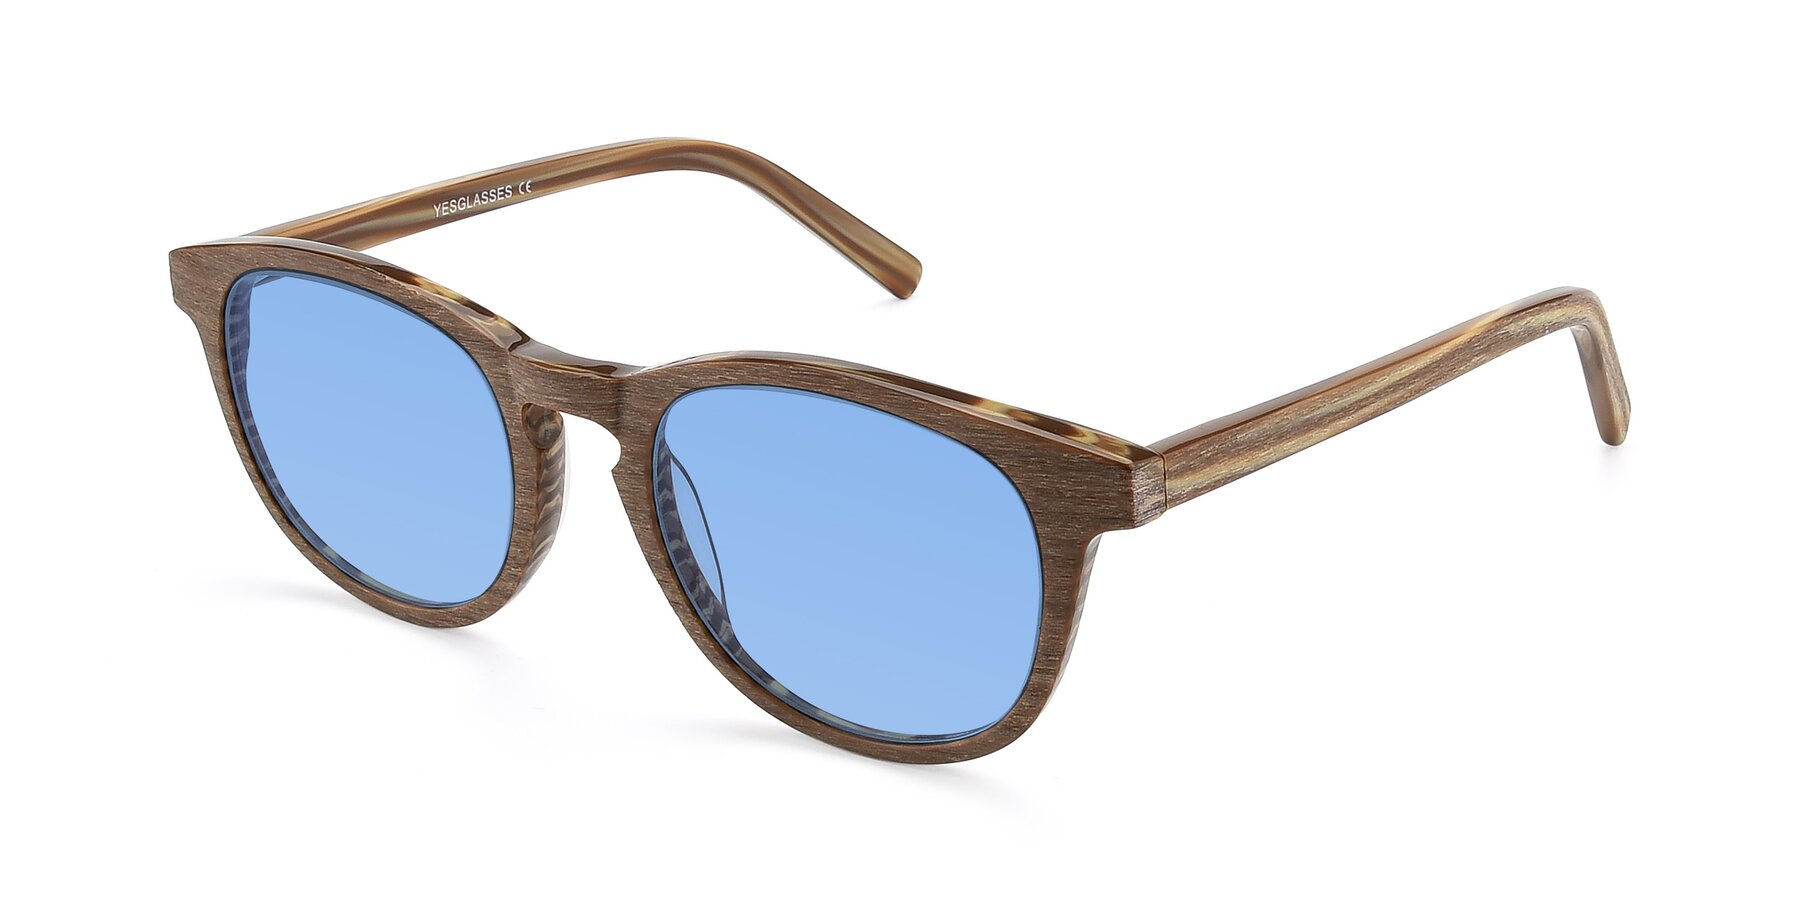 Angle of SR6044 in Brown-Wooden with Medium Blue Tinted Lenses